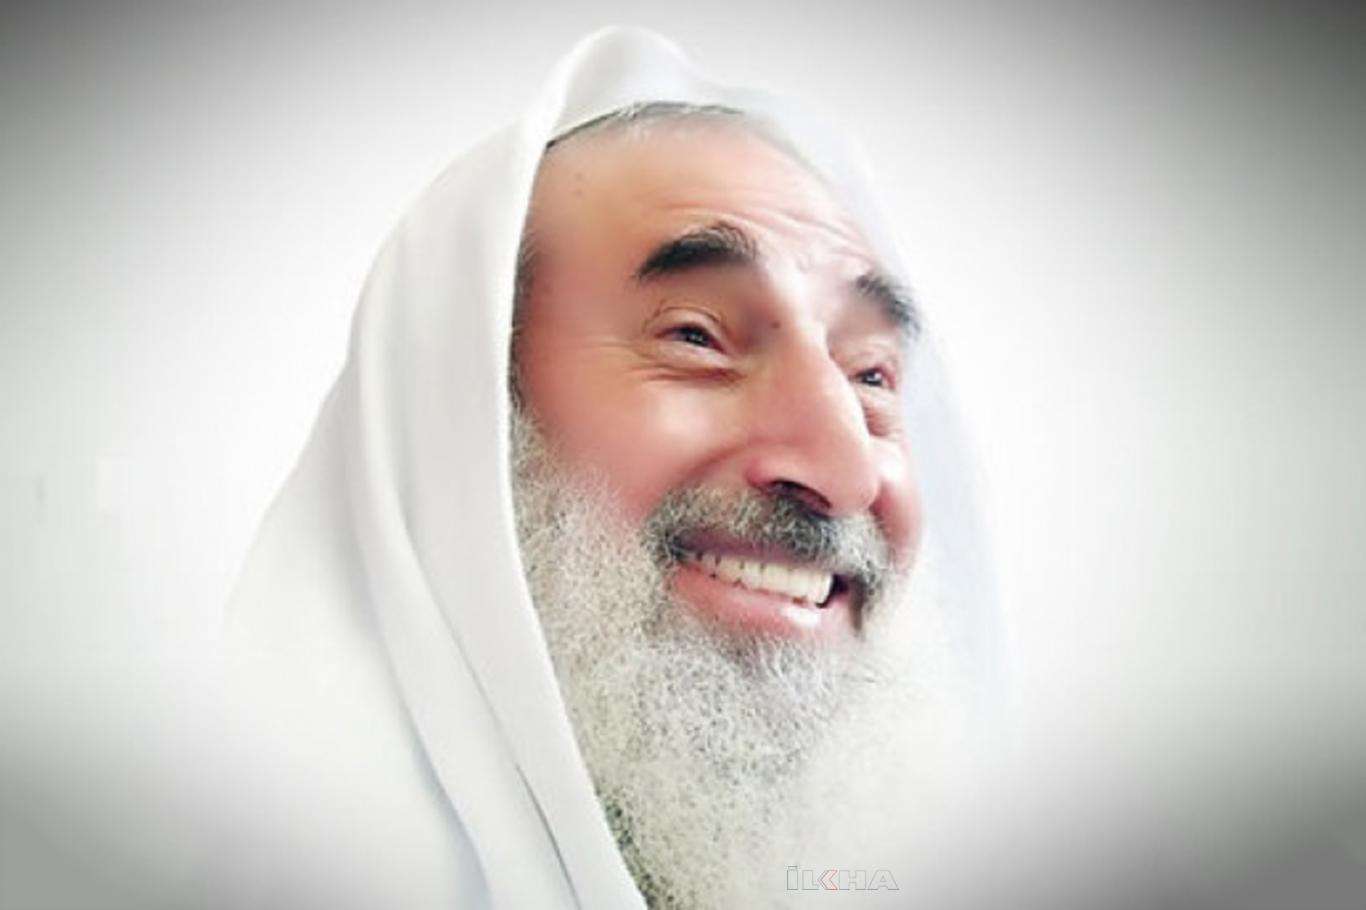 The spiritual leader of the sacred resistance: Sheikh Ahmed Yassin